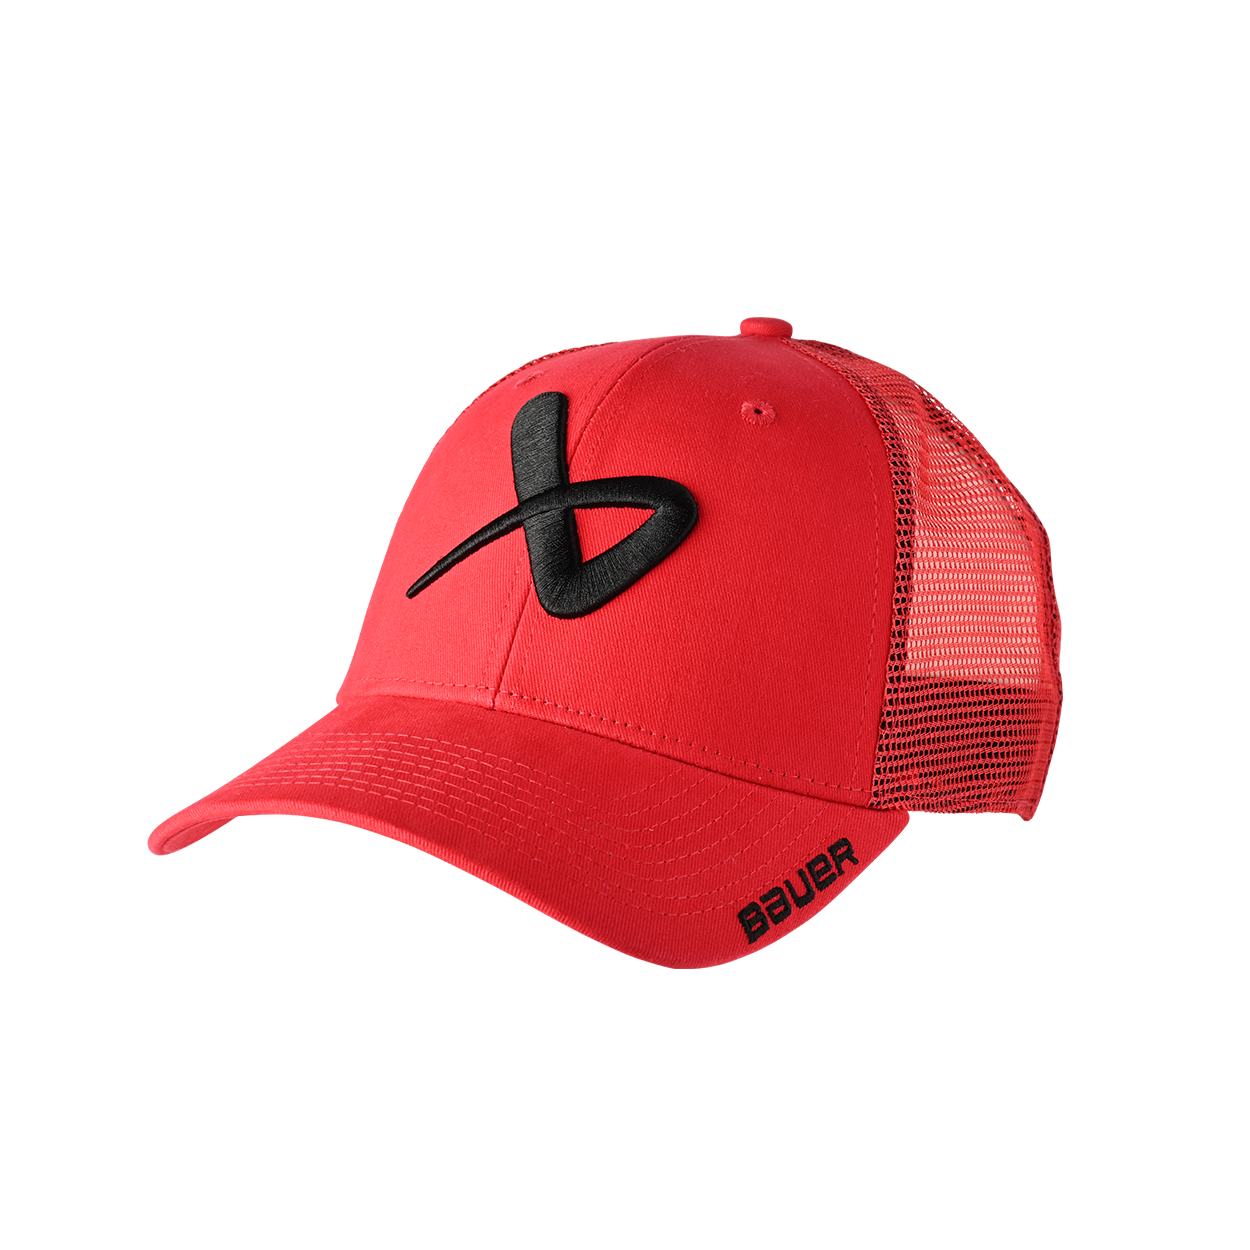 BAUER CORE ADJUSTABLE CAP YOUTH